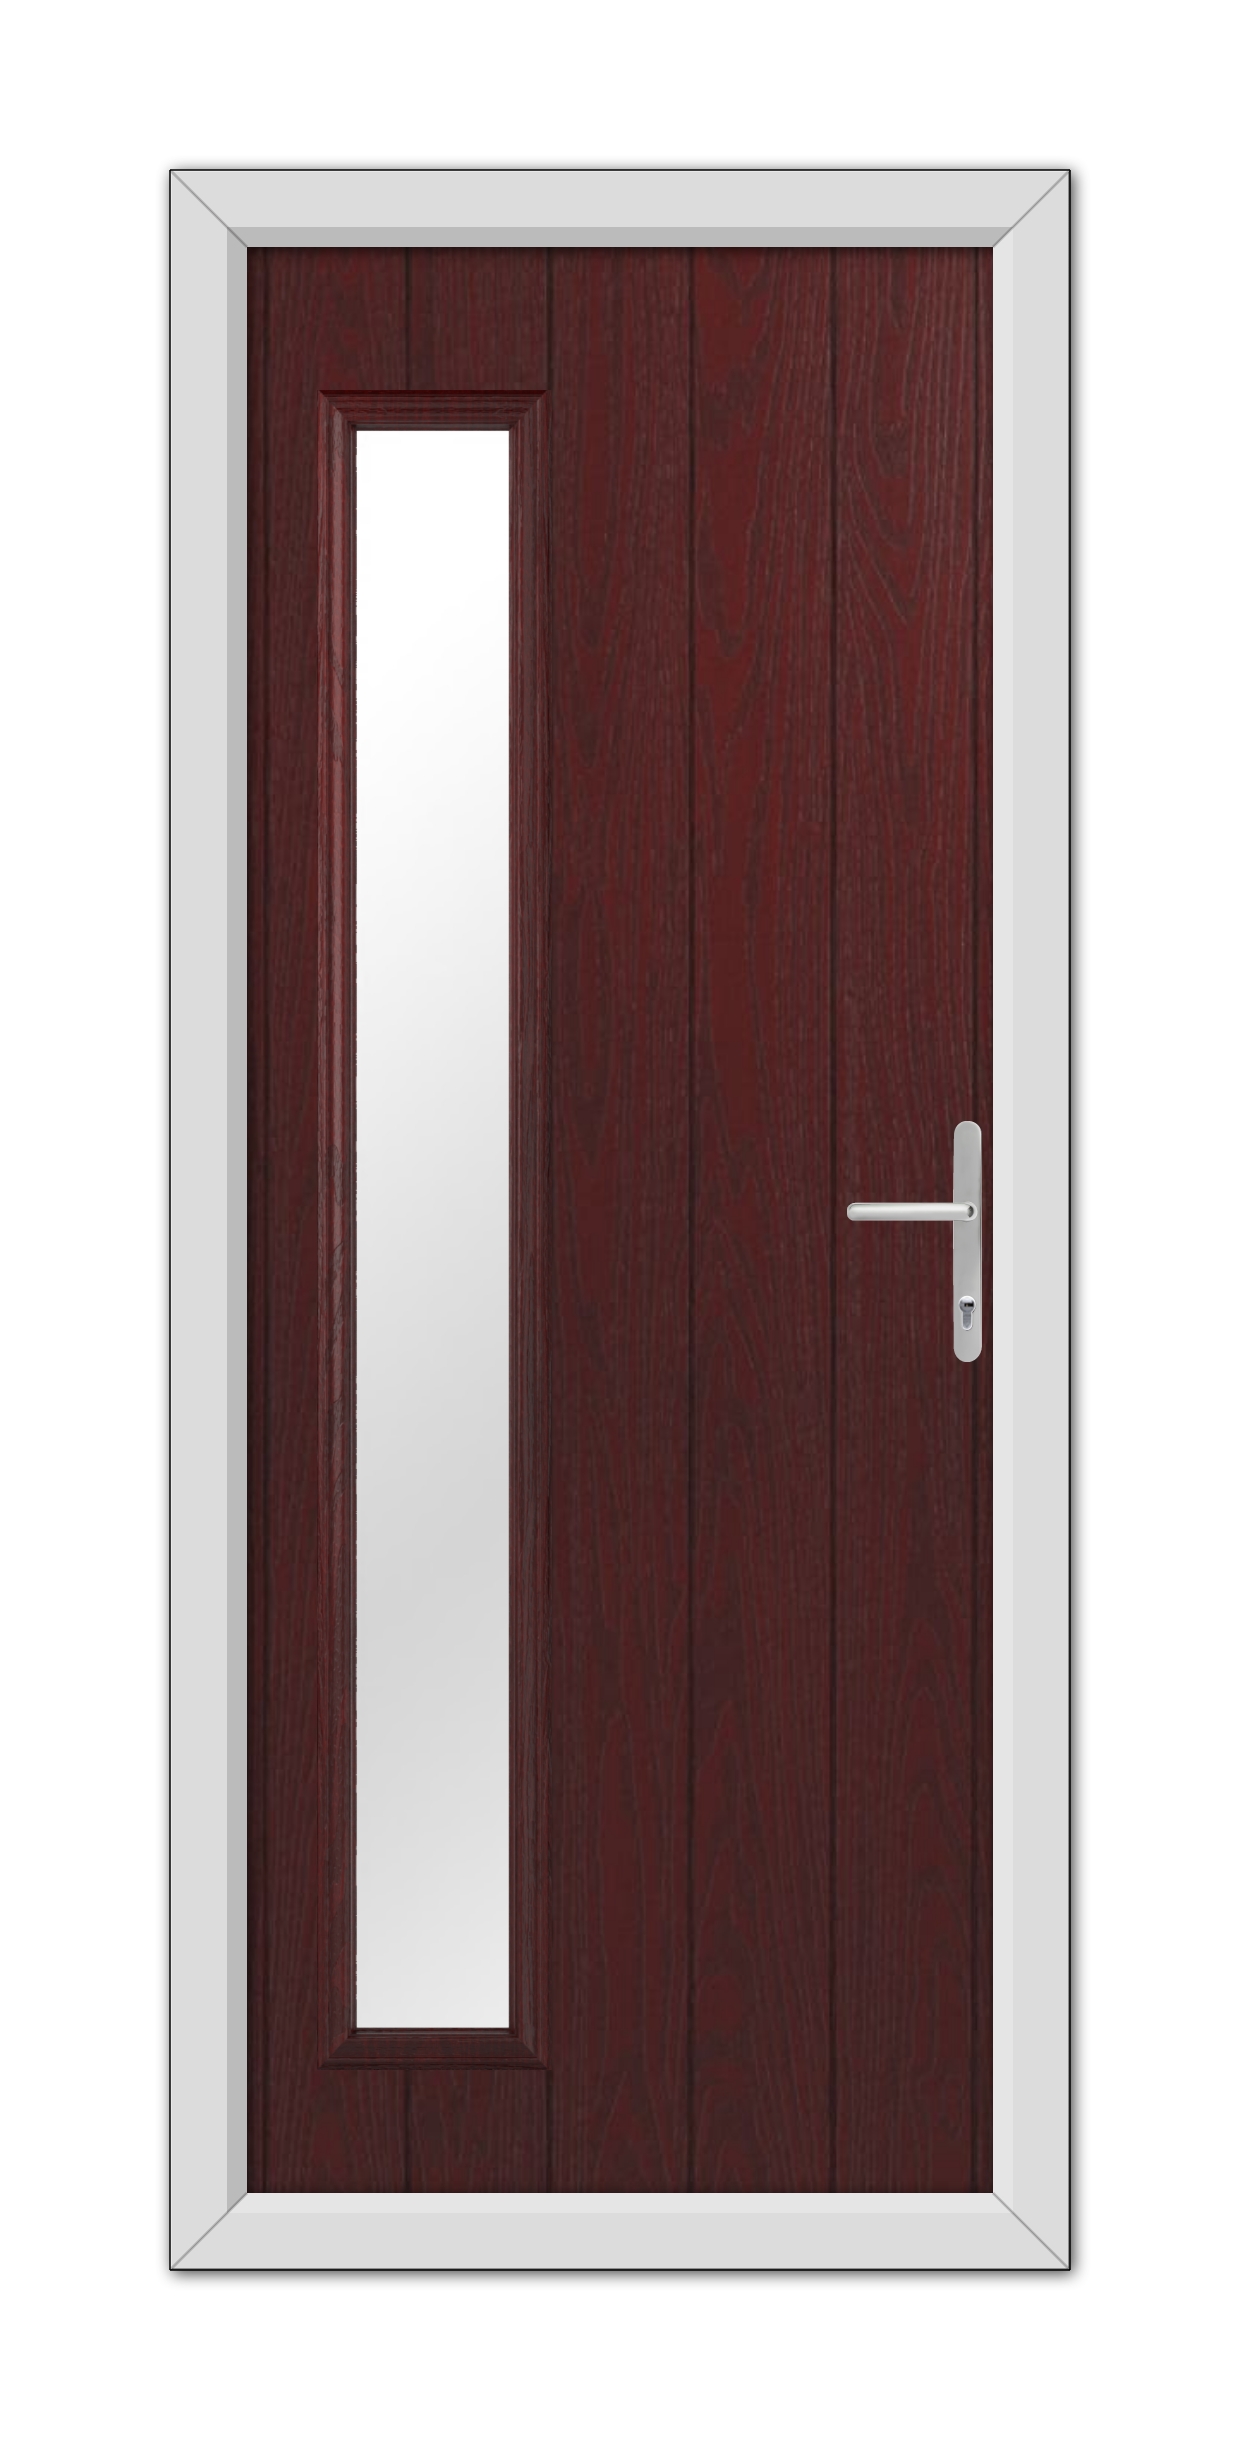 A modern Rosewood Sutherland Composite Door 48mm Timber Core with a vertical rectangular glass panel on the left side, framed in white, featuring a metallic handle on the right.